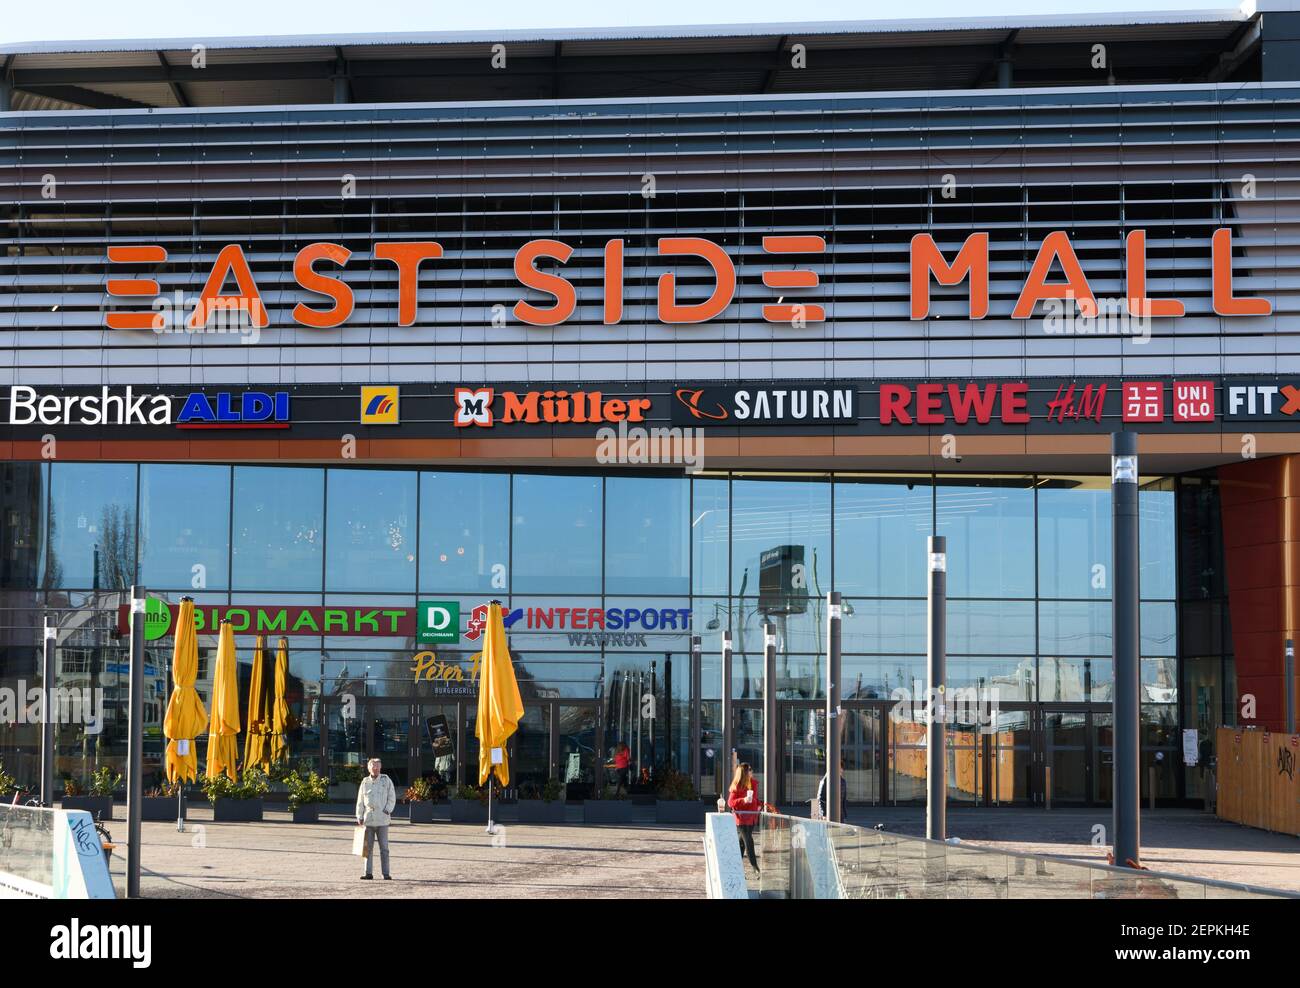 Berlin Shopping Center High Resolution Stock Photography and Images - Alamy